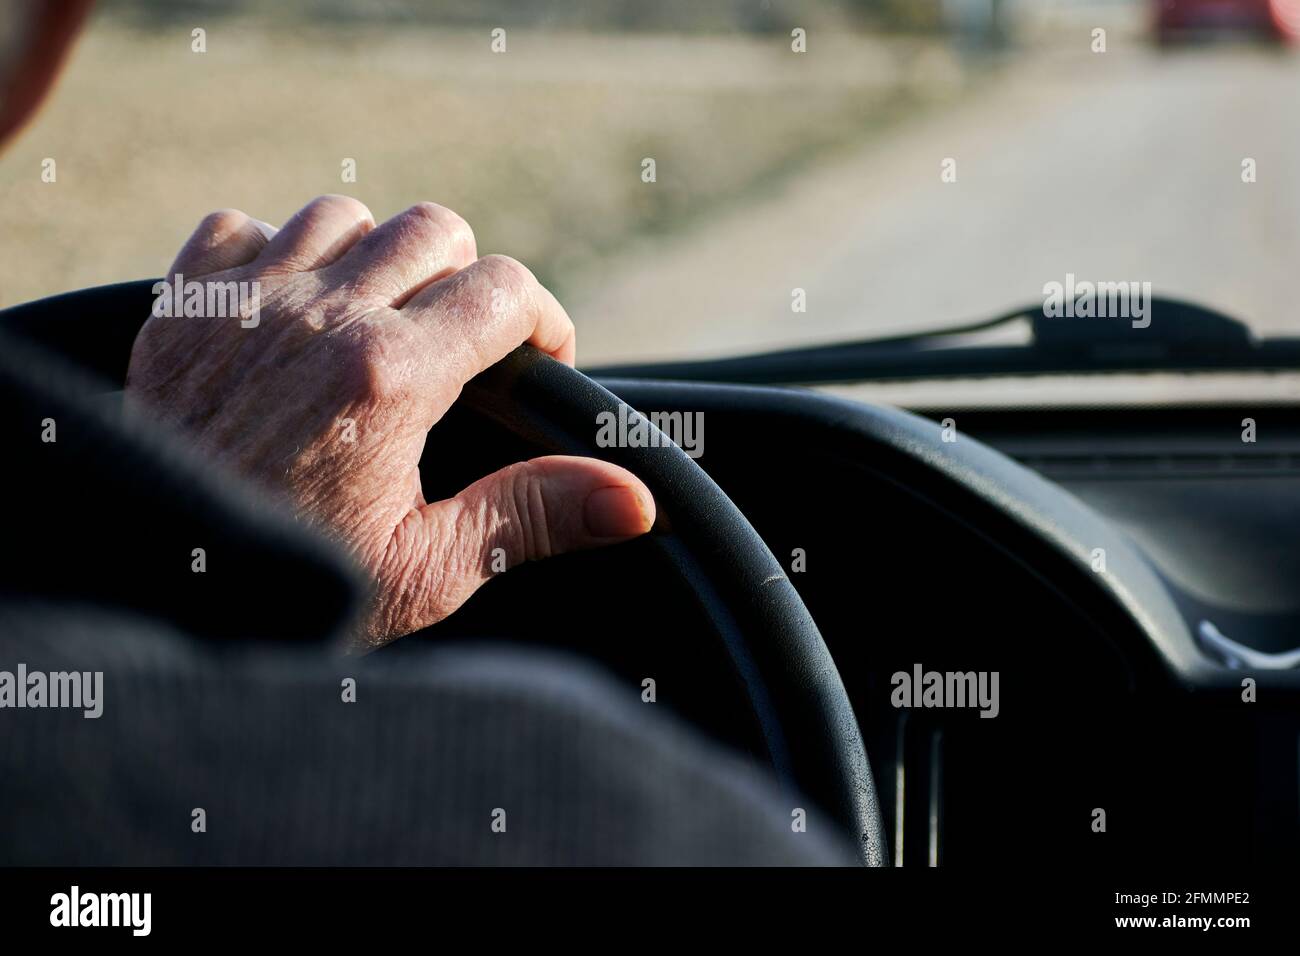 Hands of an elderly man holding the steering wheel of a vehicle Stock Photo